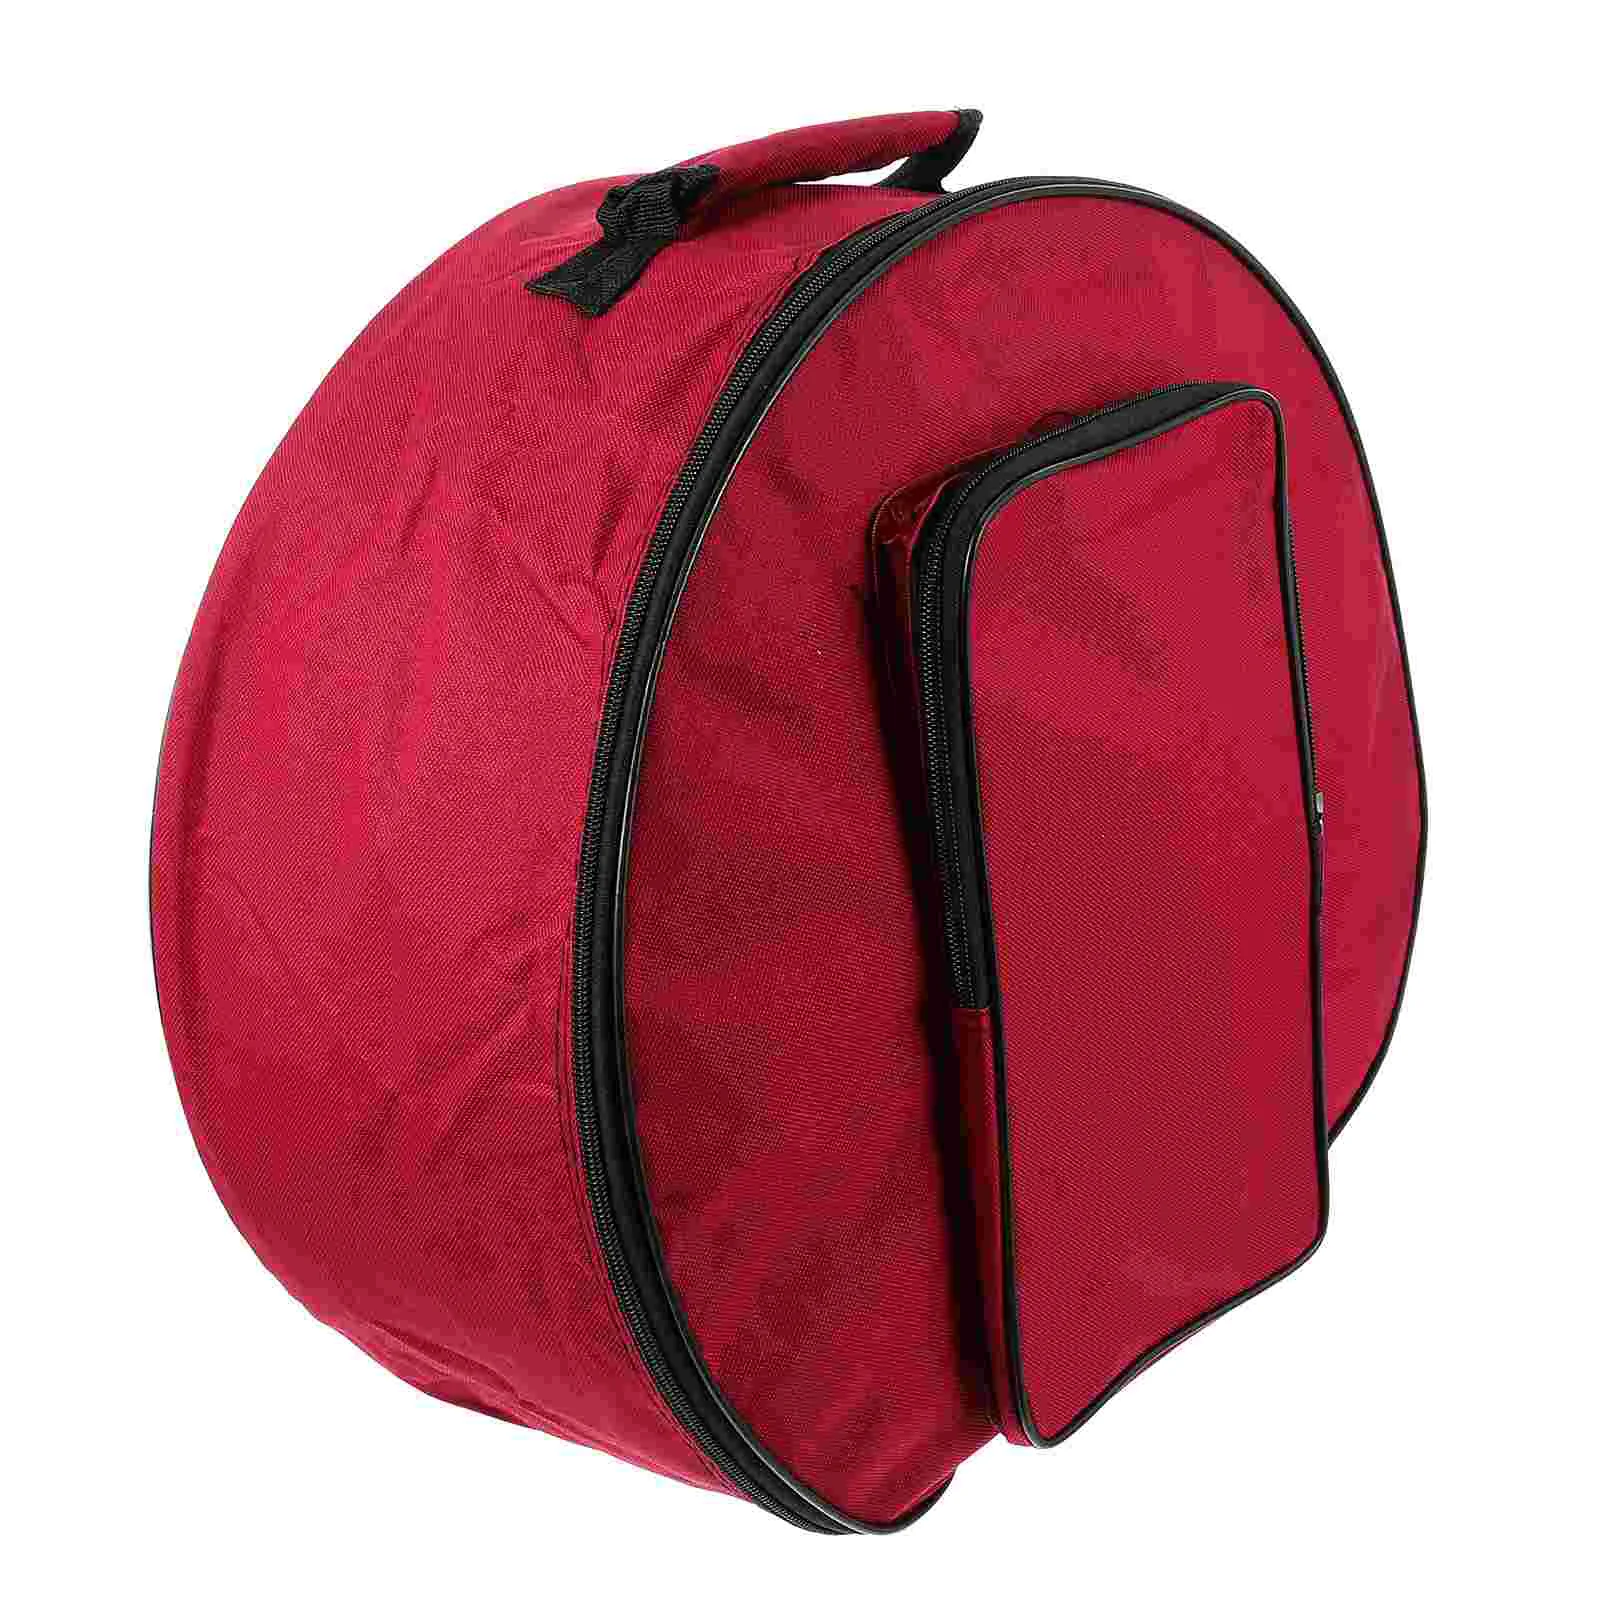 13 -14 Snare Bag Drum Case Portable Musical Instrument Percussion Instruments Accessories